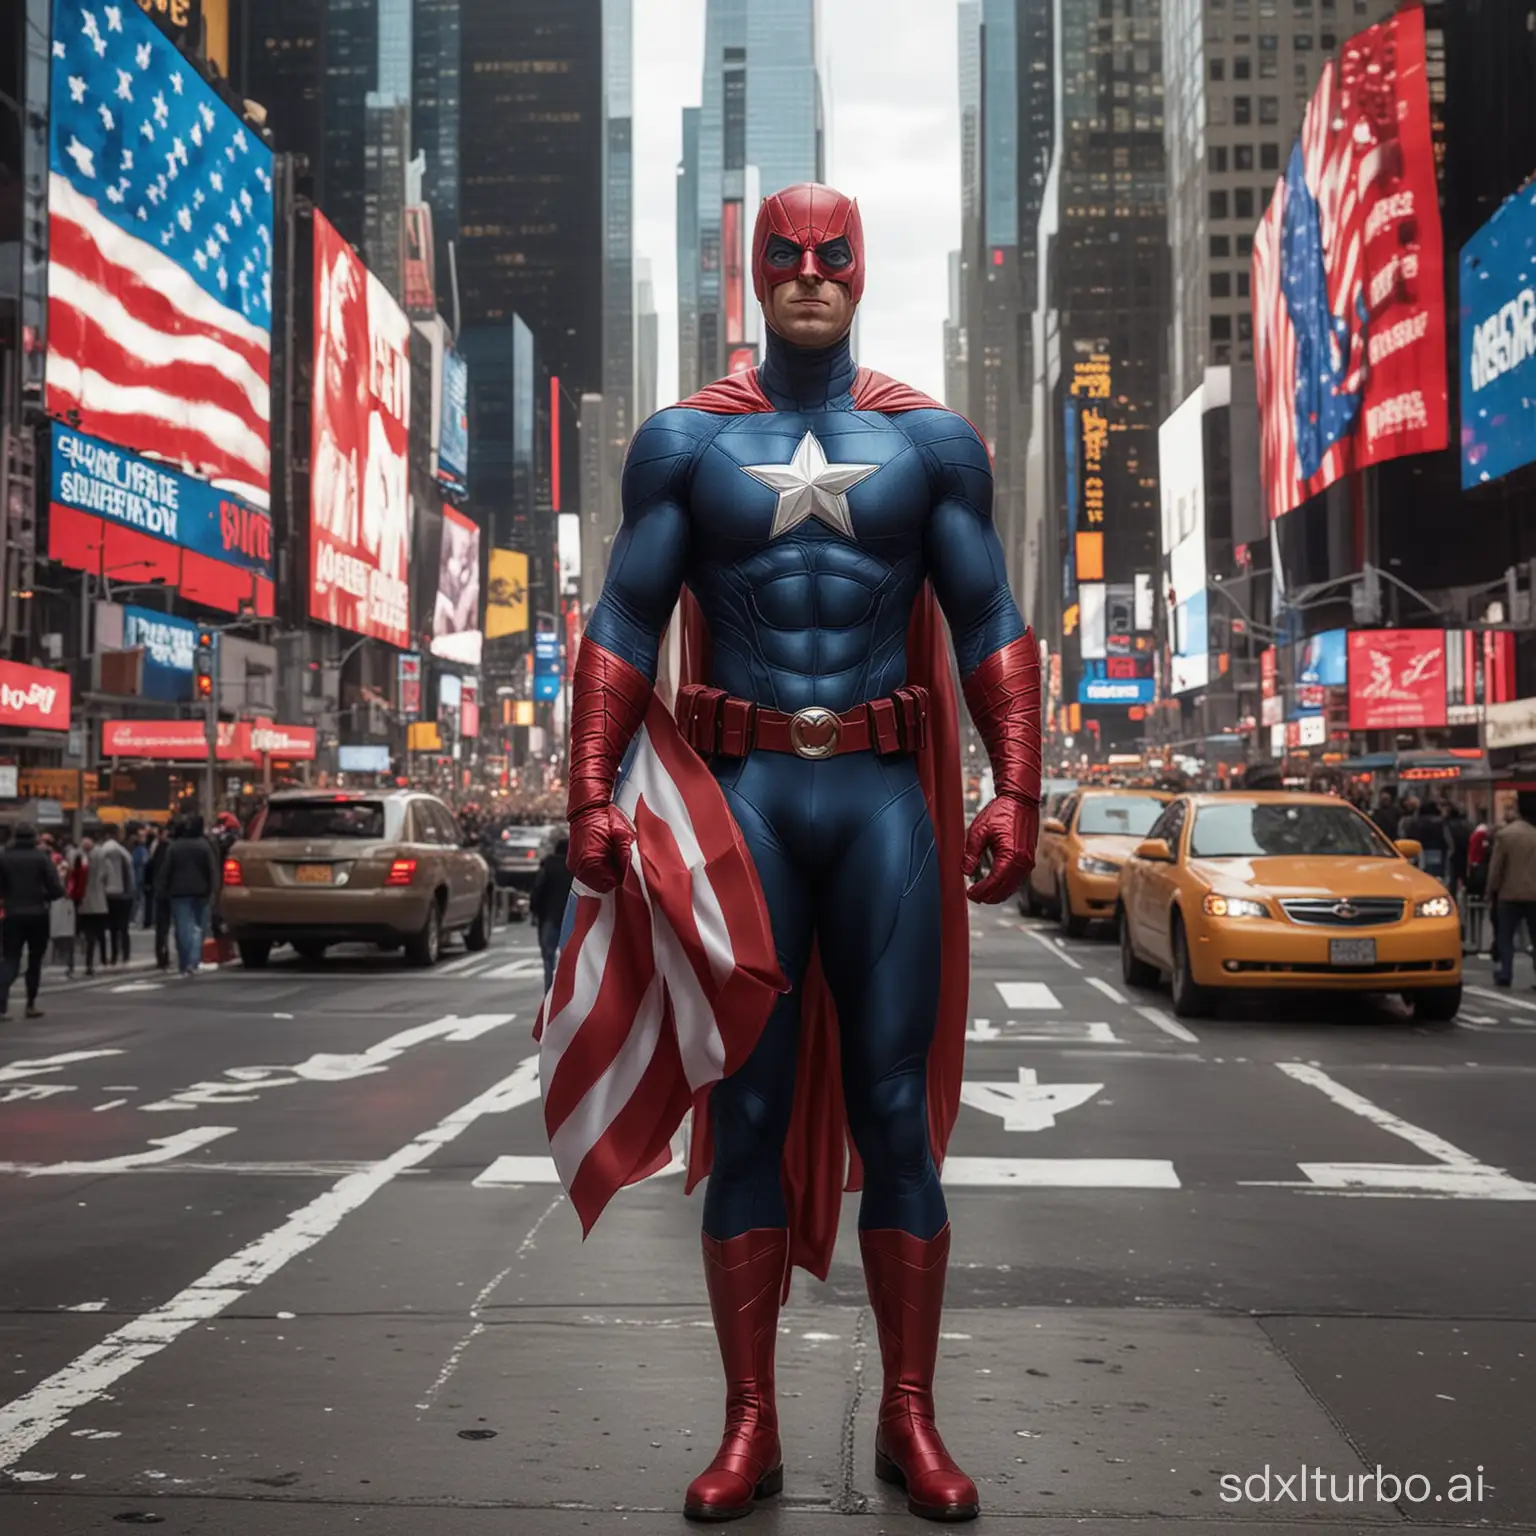 generate image of an American superhero, his dress should be inspired by American flag colours. The superhero should be standing near Times Square